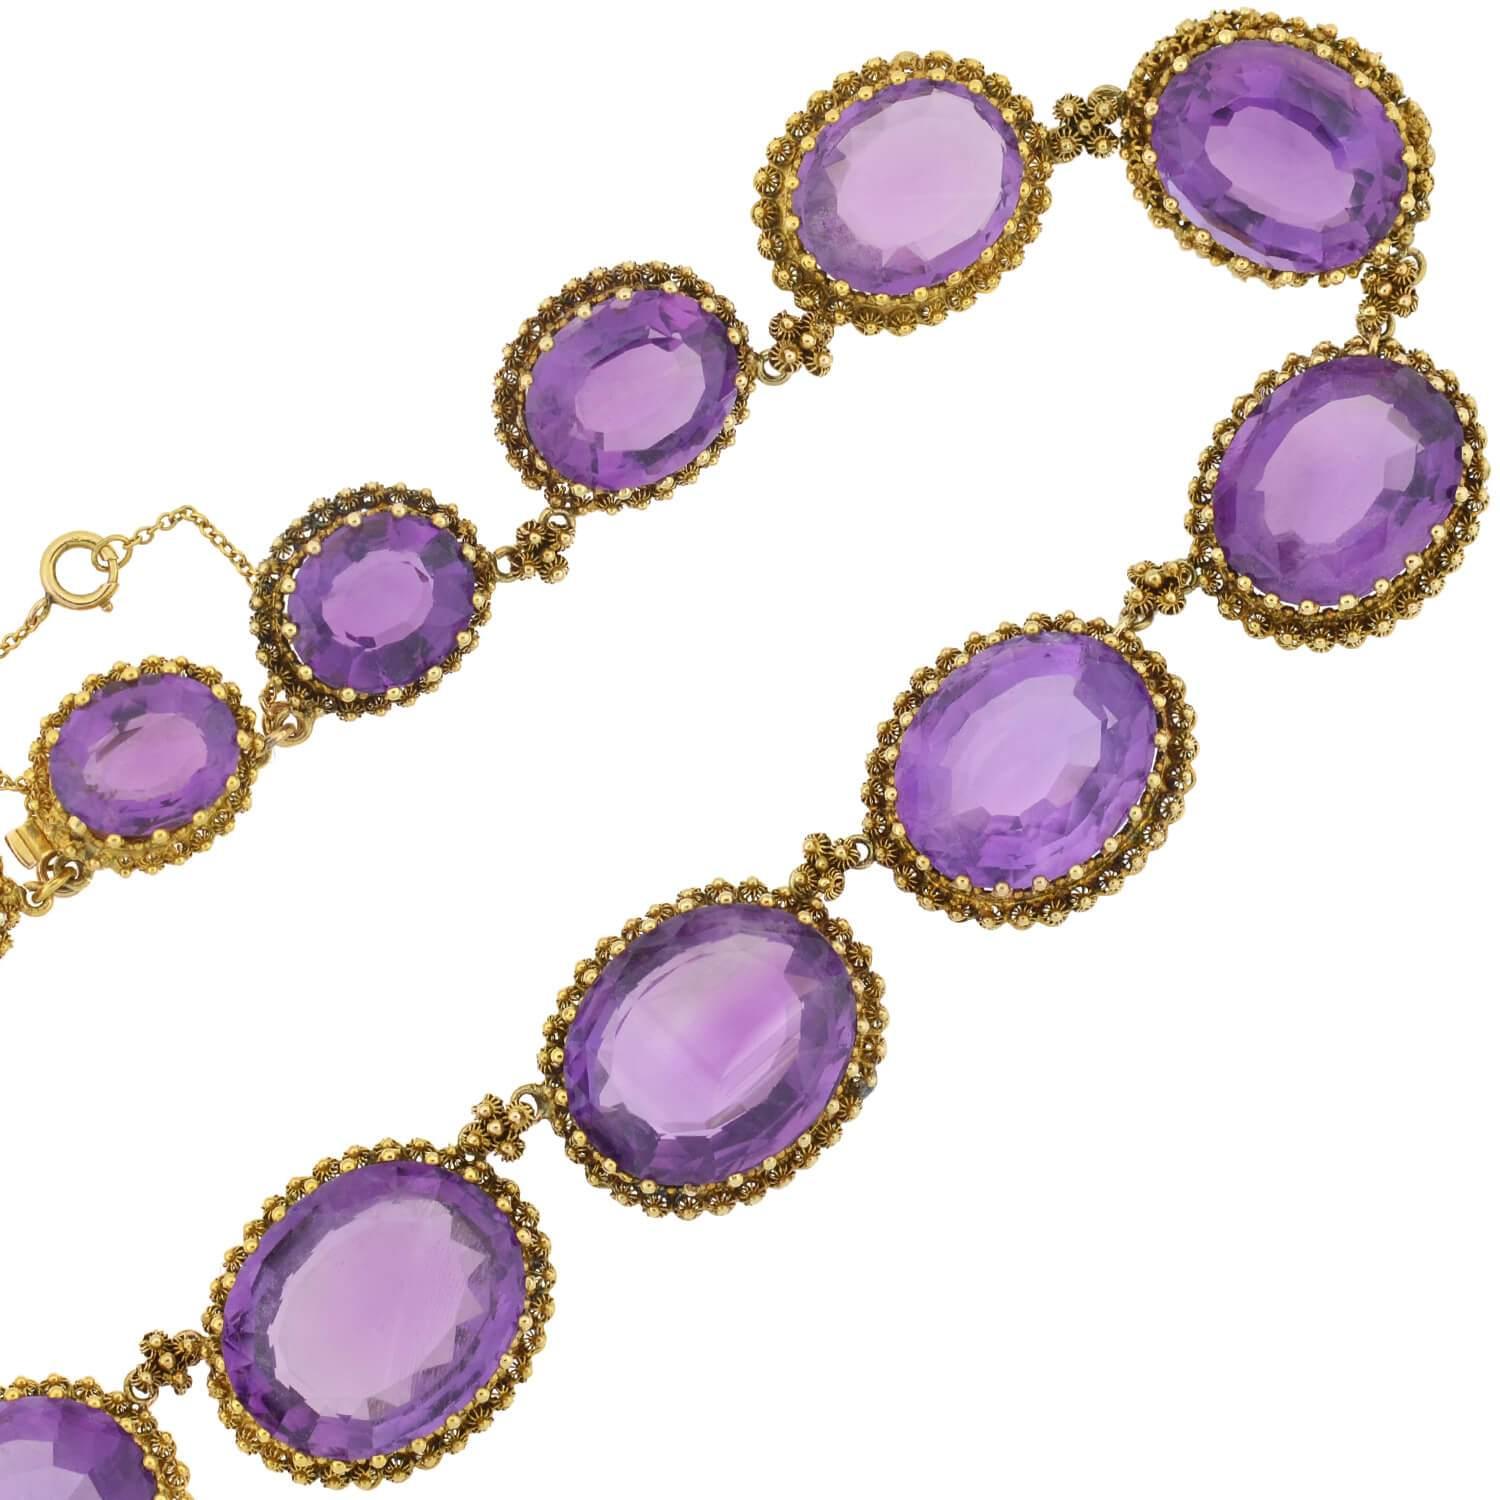 A dramatic and breathtaking amethyst link necklace from the Victorian (ca1880) era! This stunning piece is comprised of 16 faceted amethyst stones resting in an ornate 15kt yellow gold setting. The oval-shaped stones are of exceptional quality, and